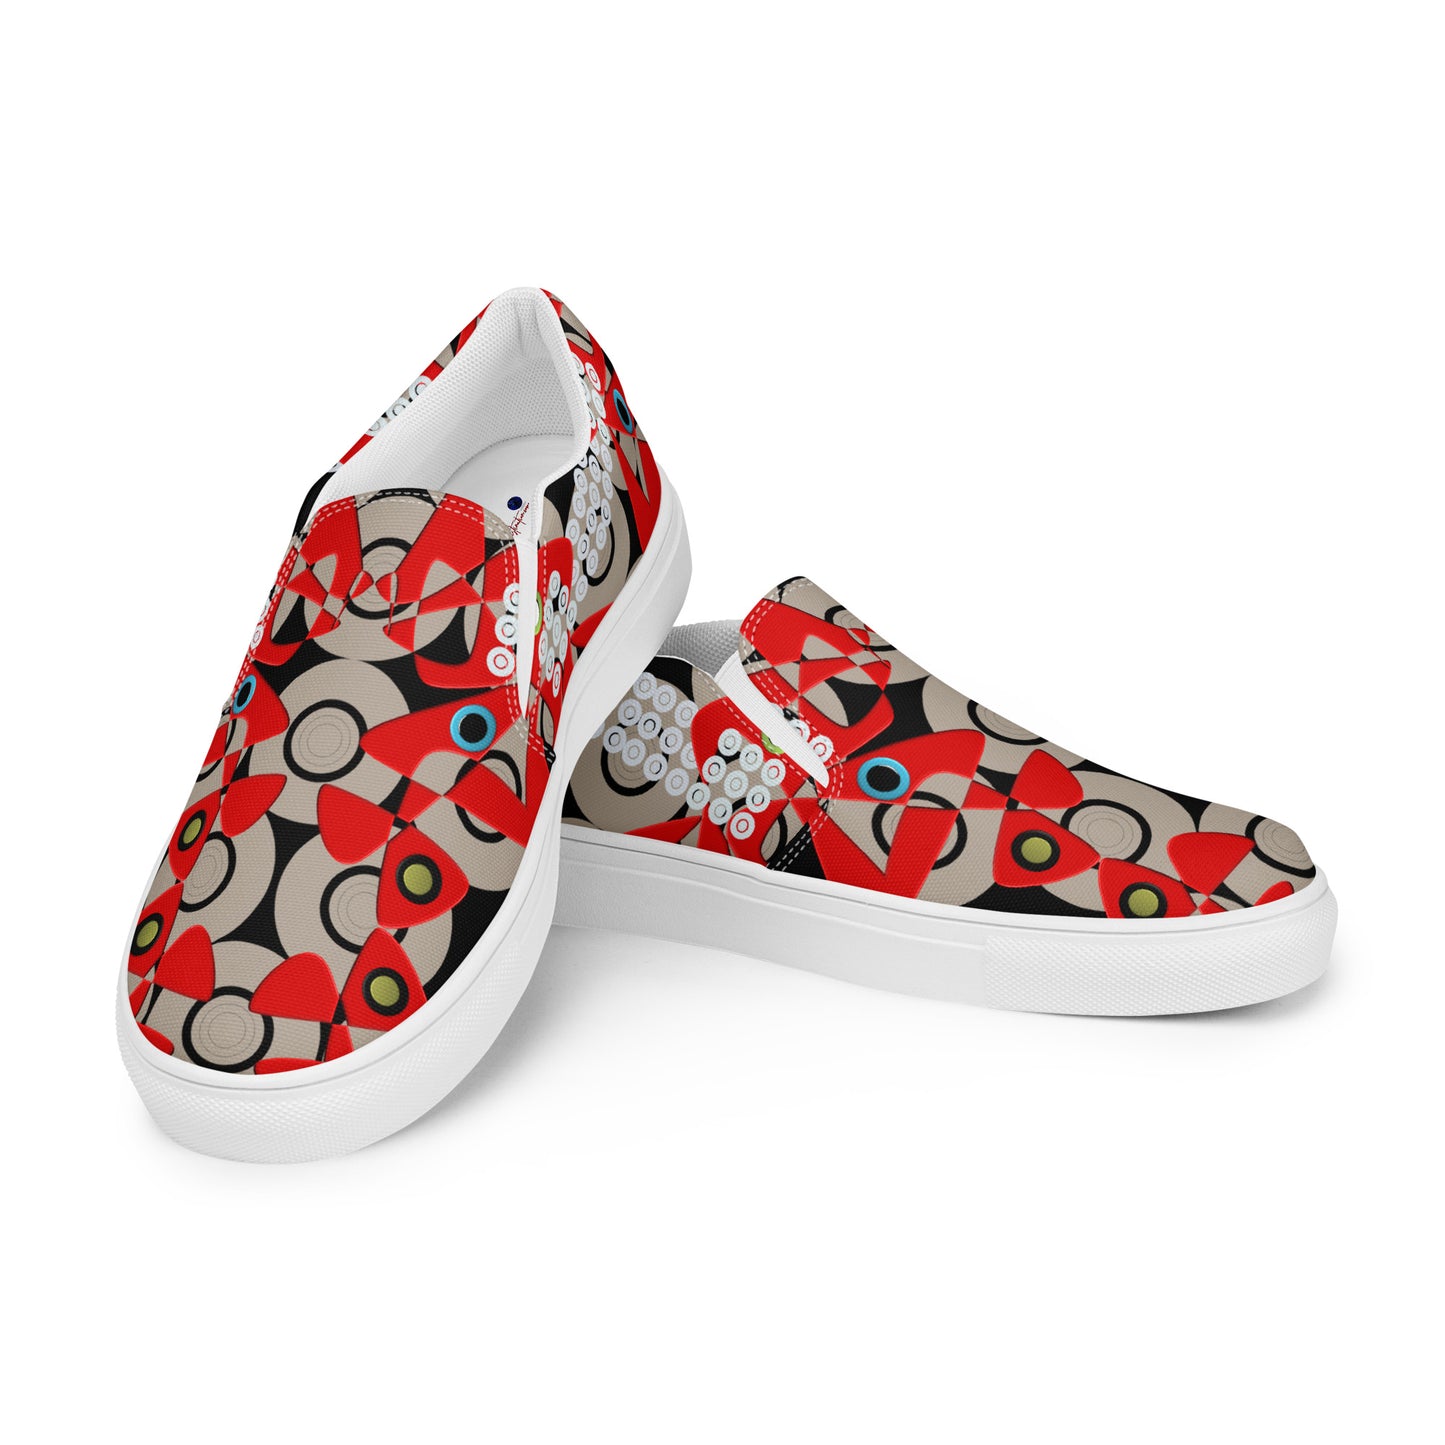 Women’s Medley slip-on canvas shoes GY2